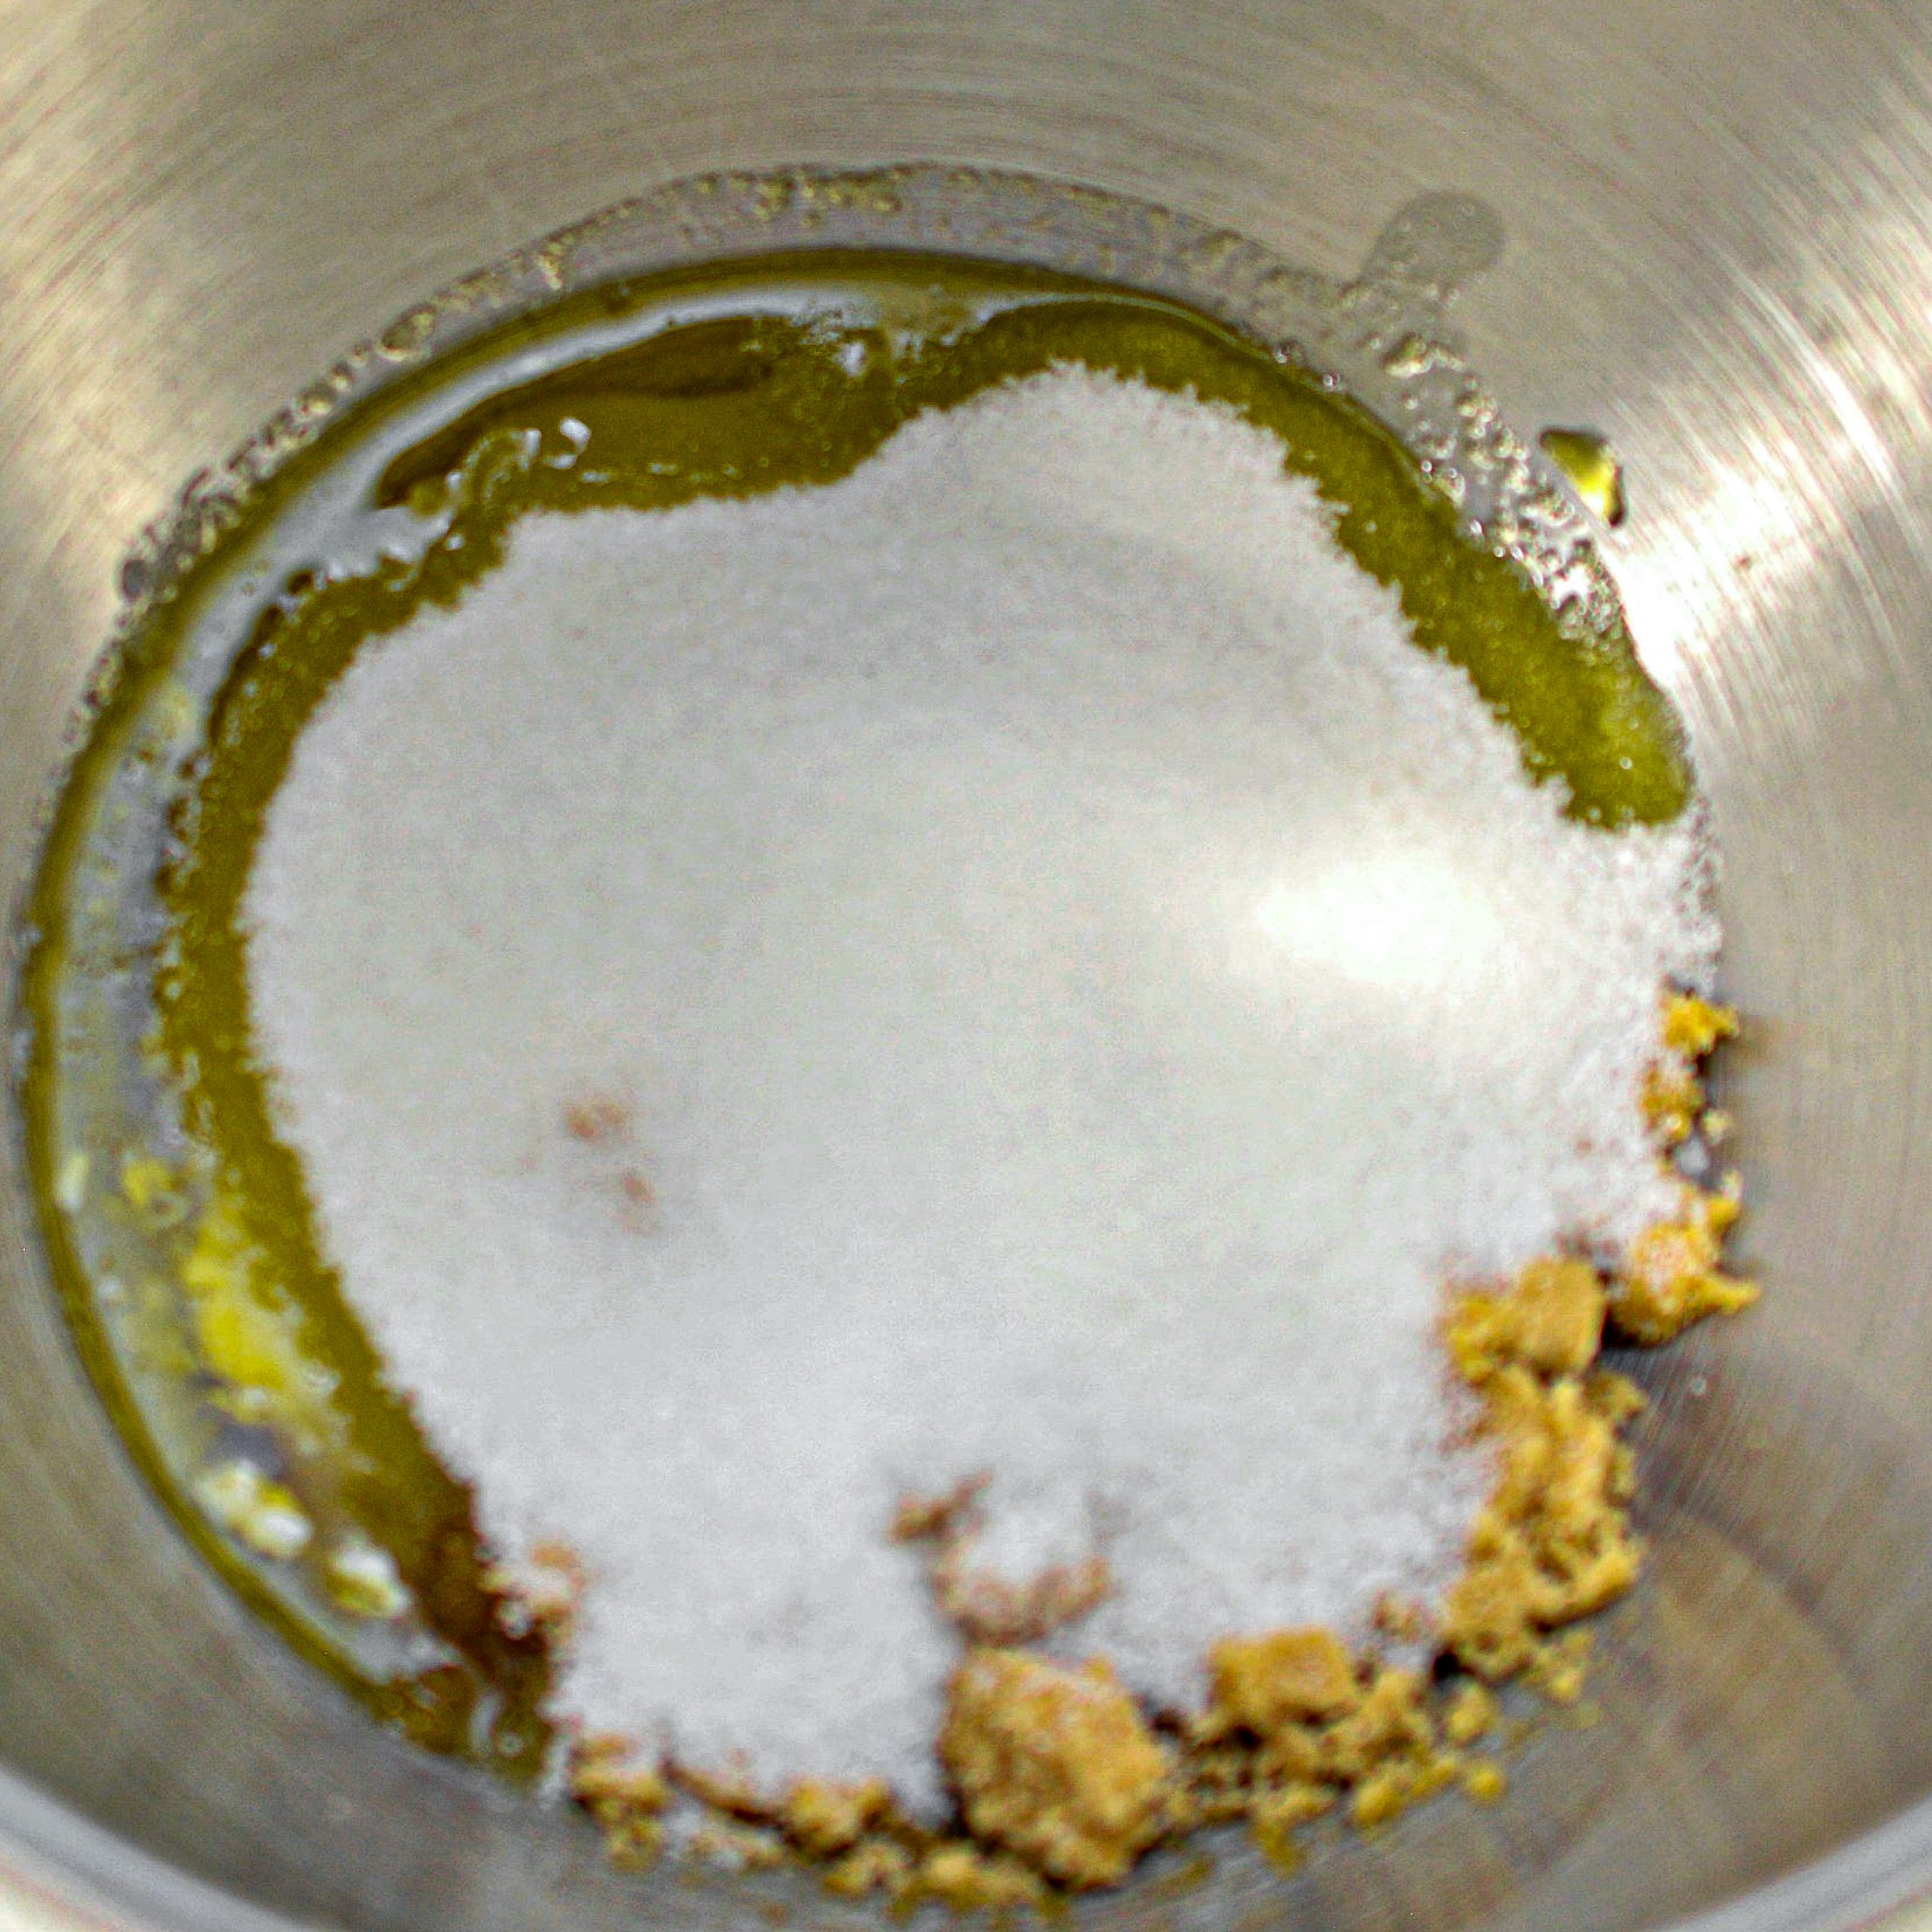 In a mixing bowl, beat together the butter, oil, and sugars until well combined and fluffy.